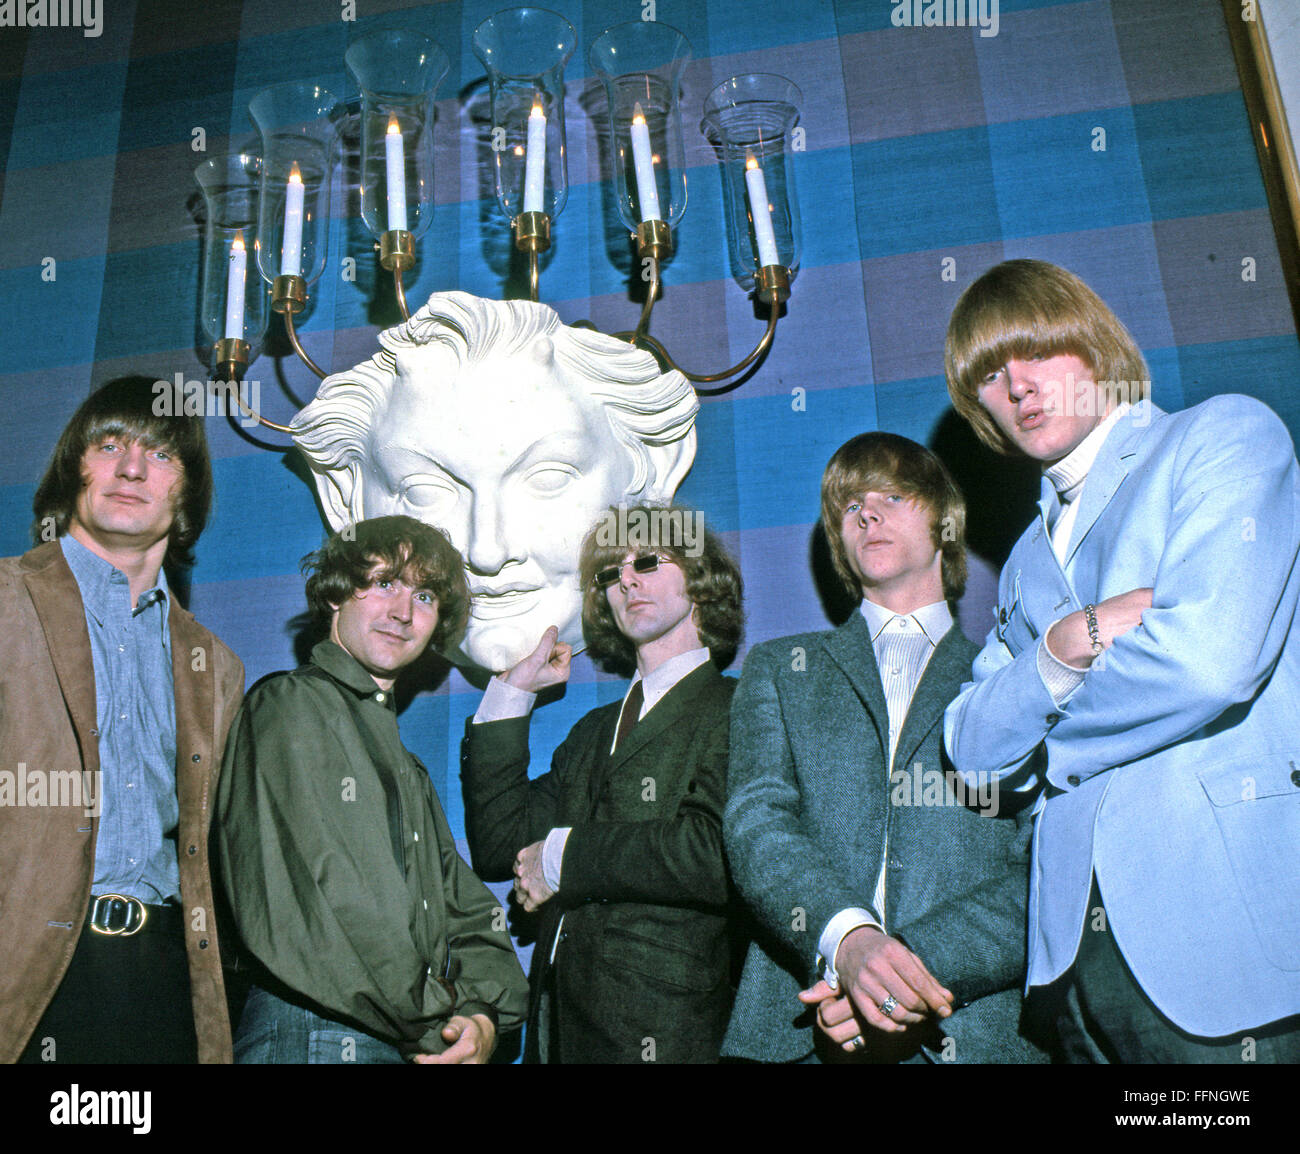 BYRDS  US rock group about 1964, From left: Gene Clark, Dave Crosby, Roger McGuinn, Michael Clarke, Chris Hillman Stock Photo